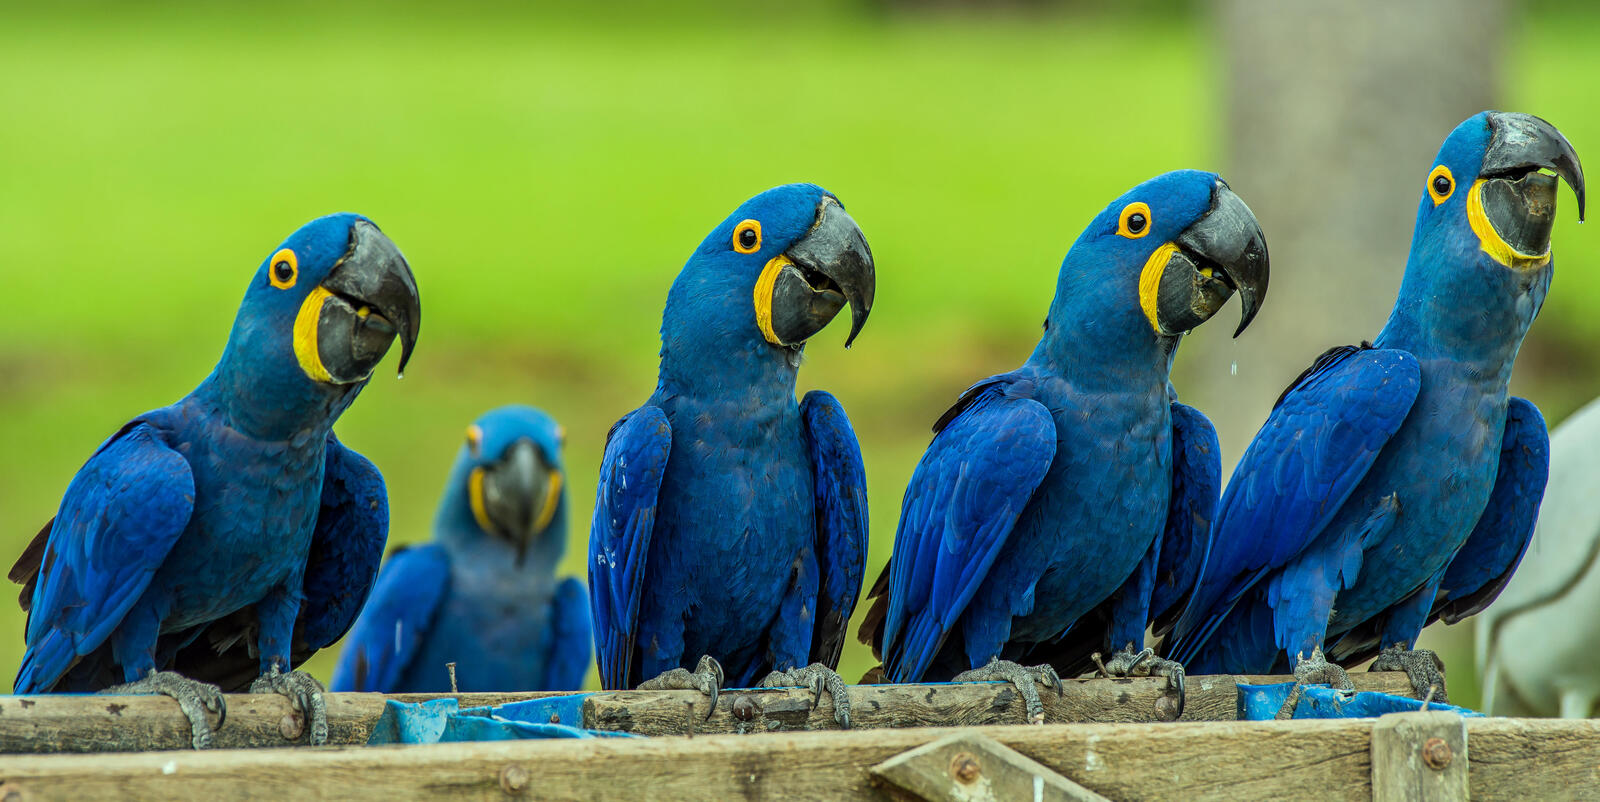 Wallpapers Hyacinth macaw parrot panorama on the desktop